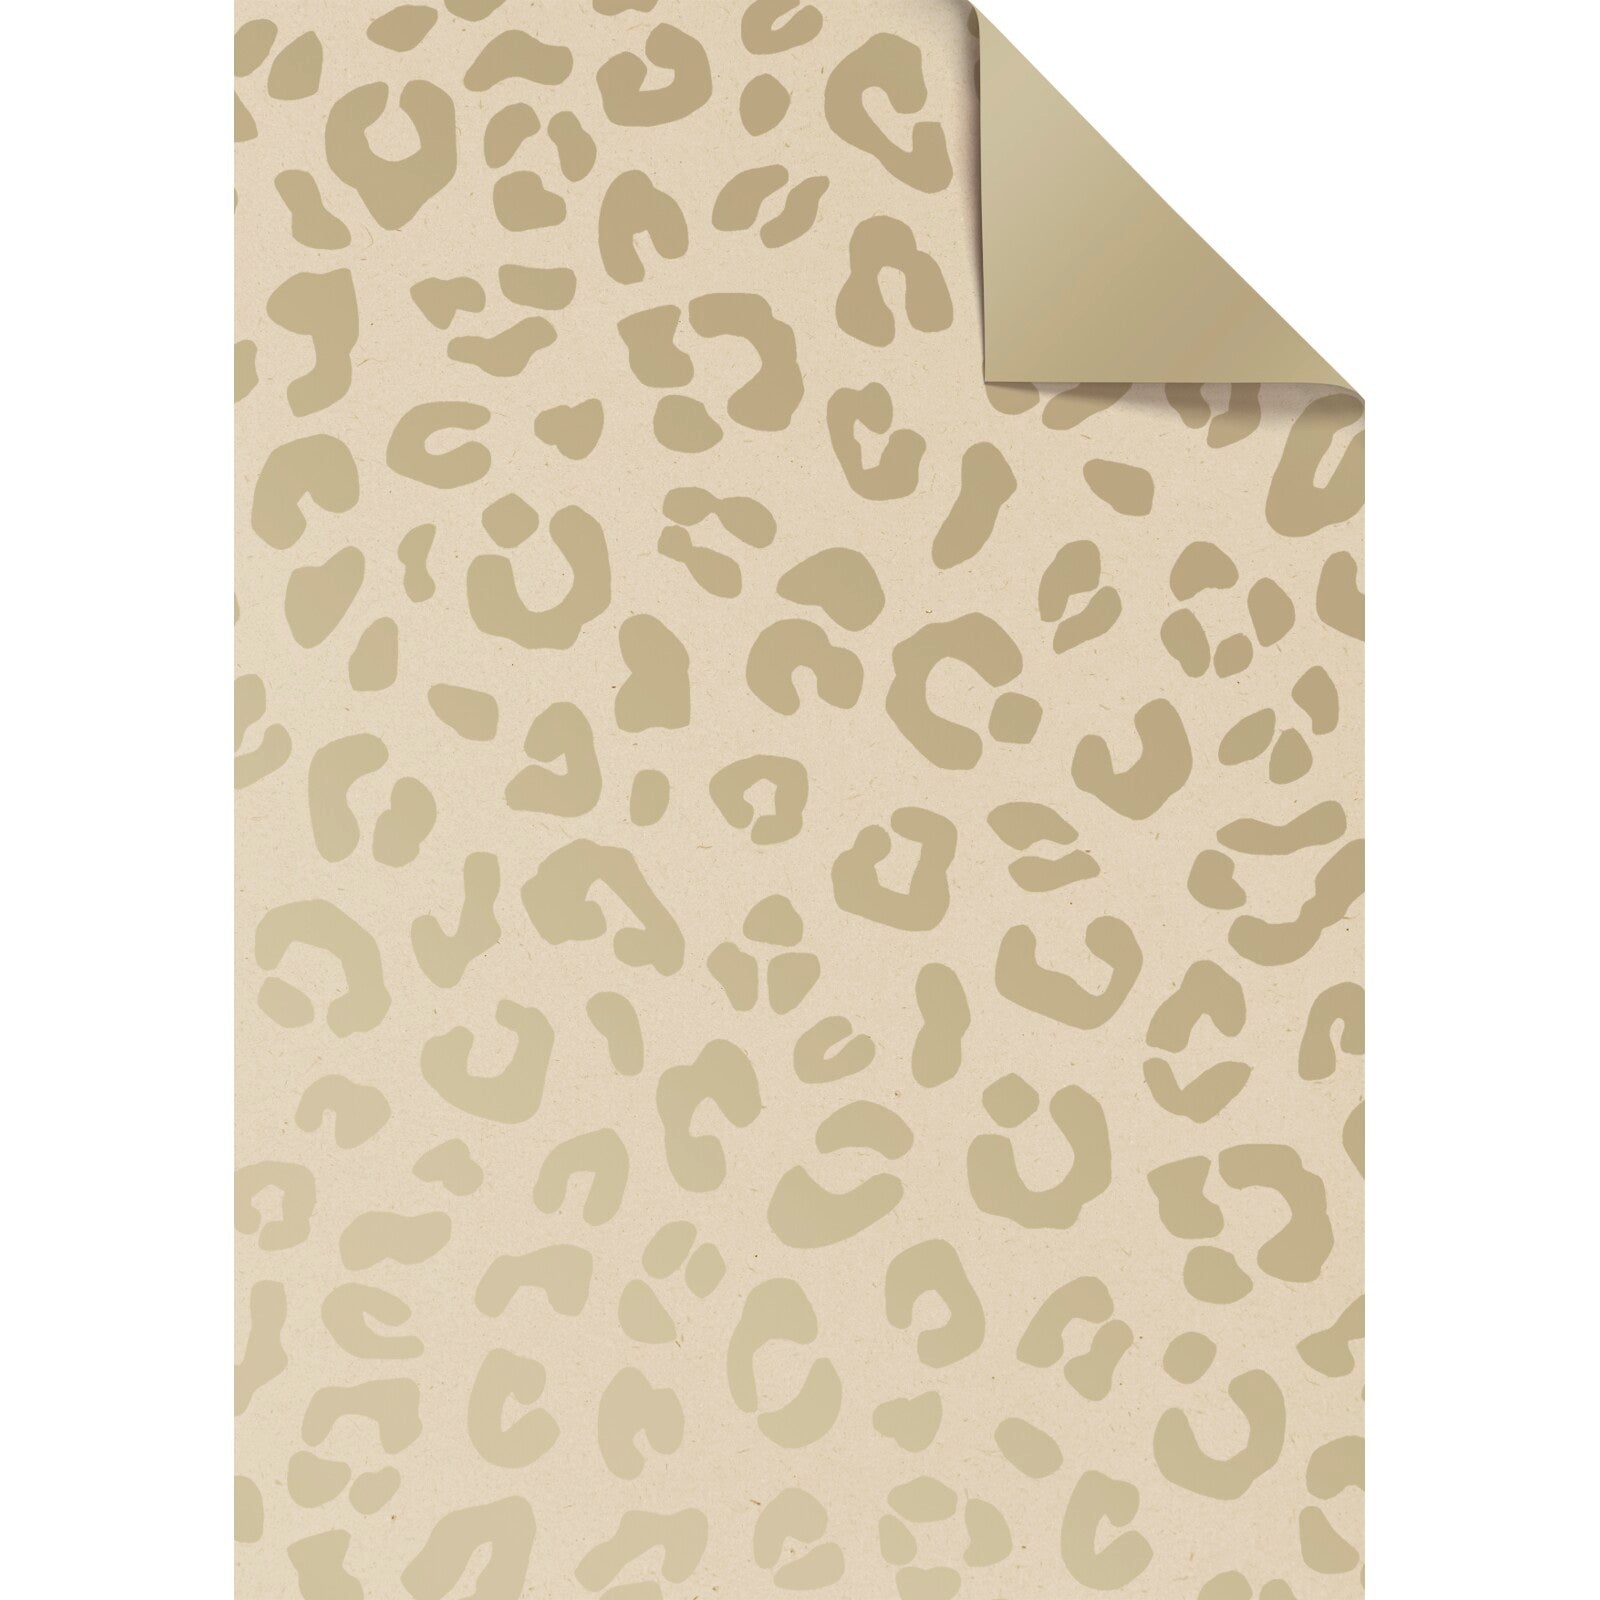 Beda Gold Leopard Single Wrapping Paper Sheet by penny black